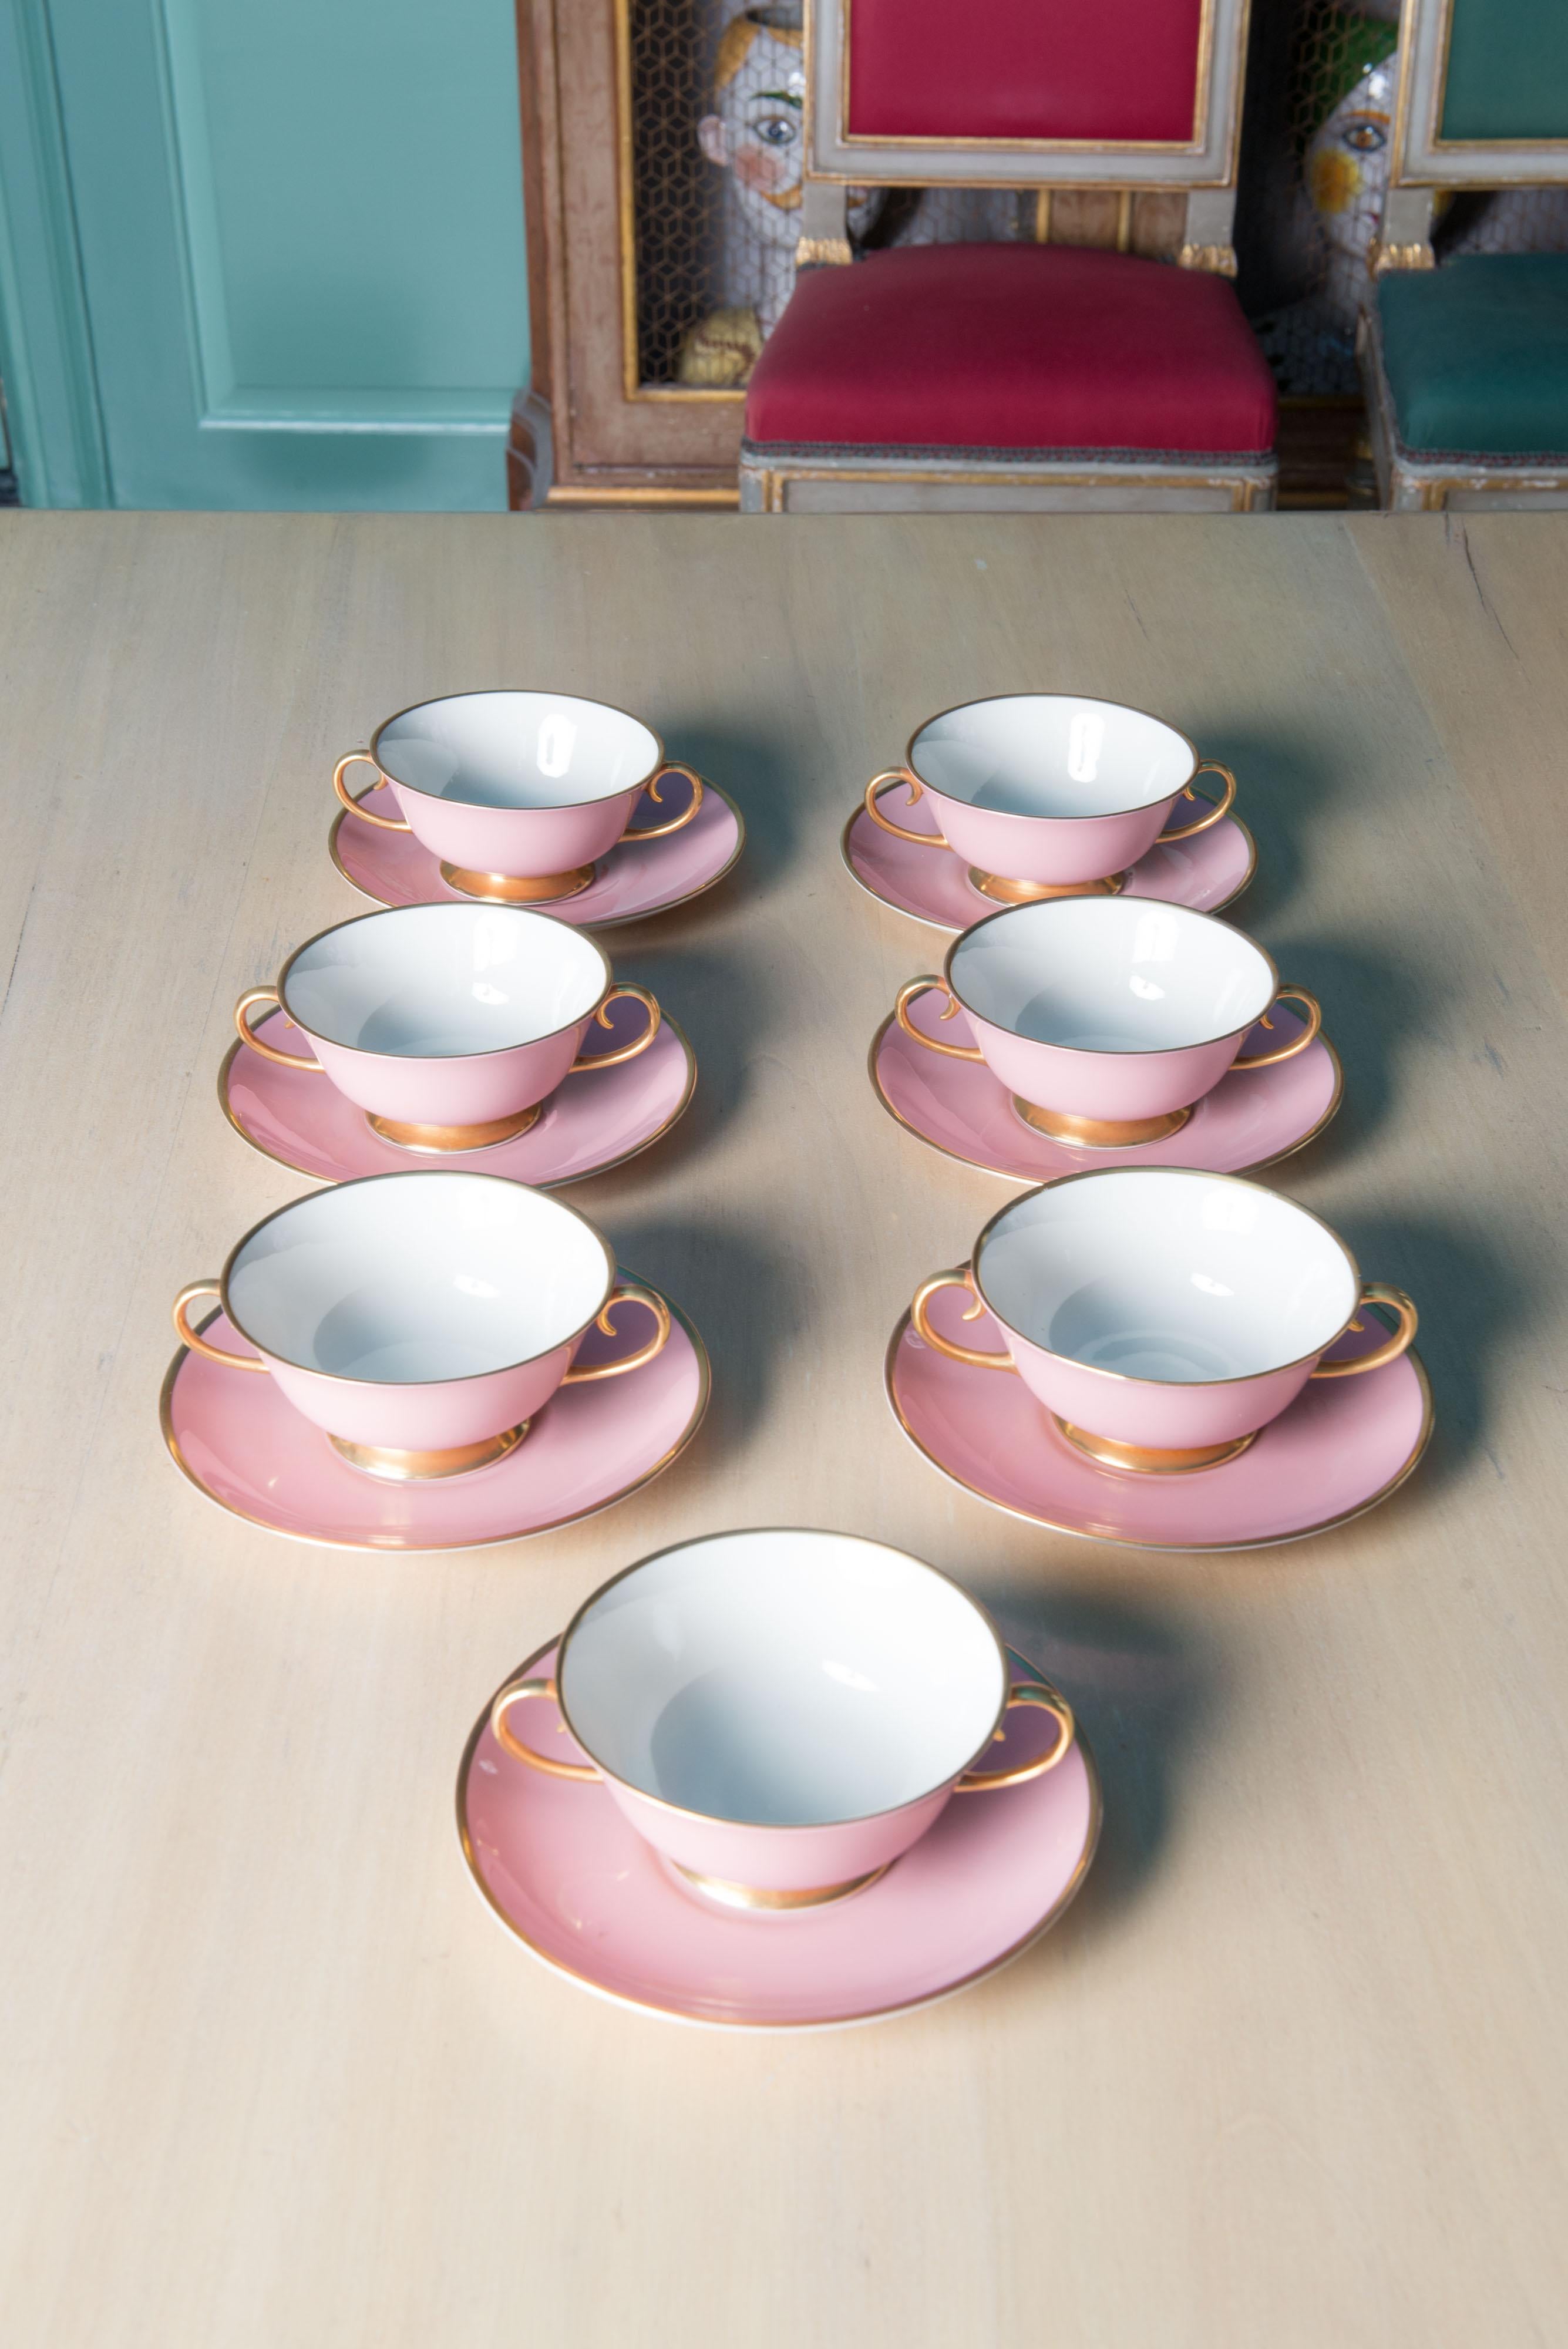 Carole Stupell, Ltd. china made by Flintridge China in California. The Flintridge China Company began in Pasadena, CA in 1946. It was acquired by Gorham in 1970. This set includes 7 cups and saucers, 7 cream soups and saucers, 7 dessert plates.